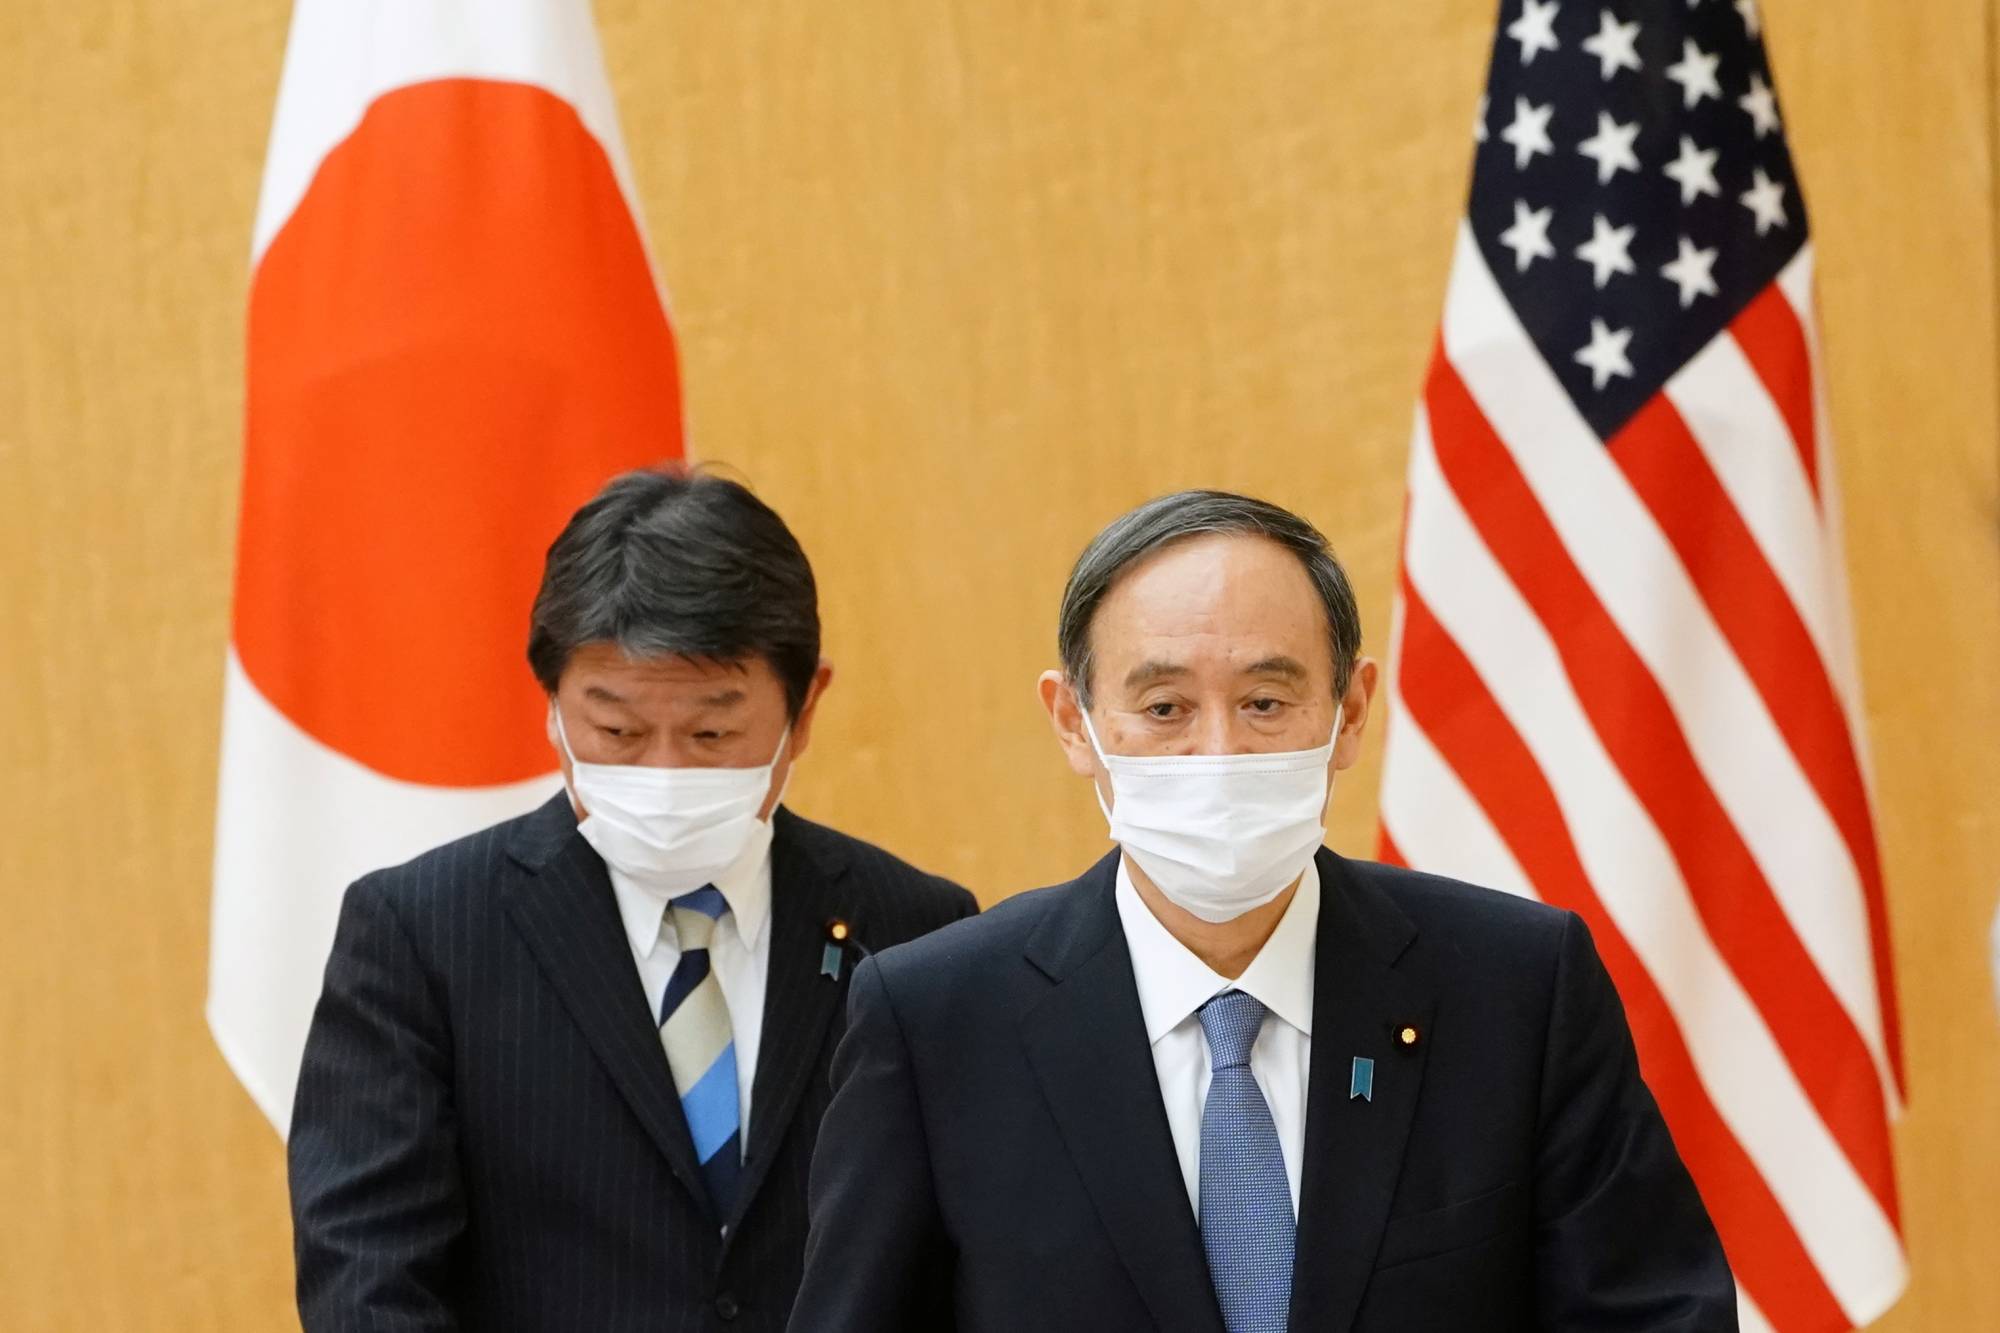 Prime Minister Yoshihide Suga and Foreign Minister Toshimitsu Motegi attend a meeting with the U.S. Secretary of State Antony Blinken at the Prime Minister's office in Tokyo on March 16. | REUTERS